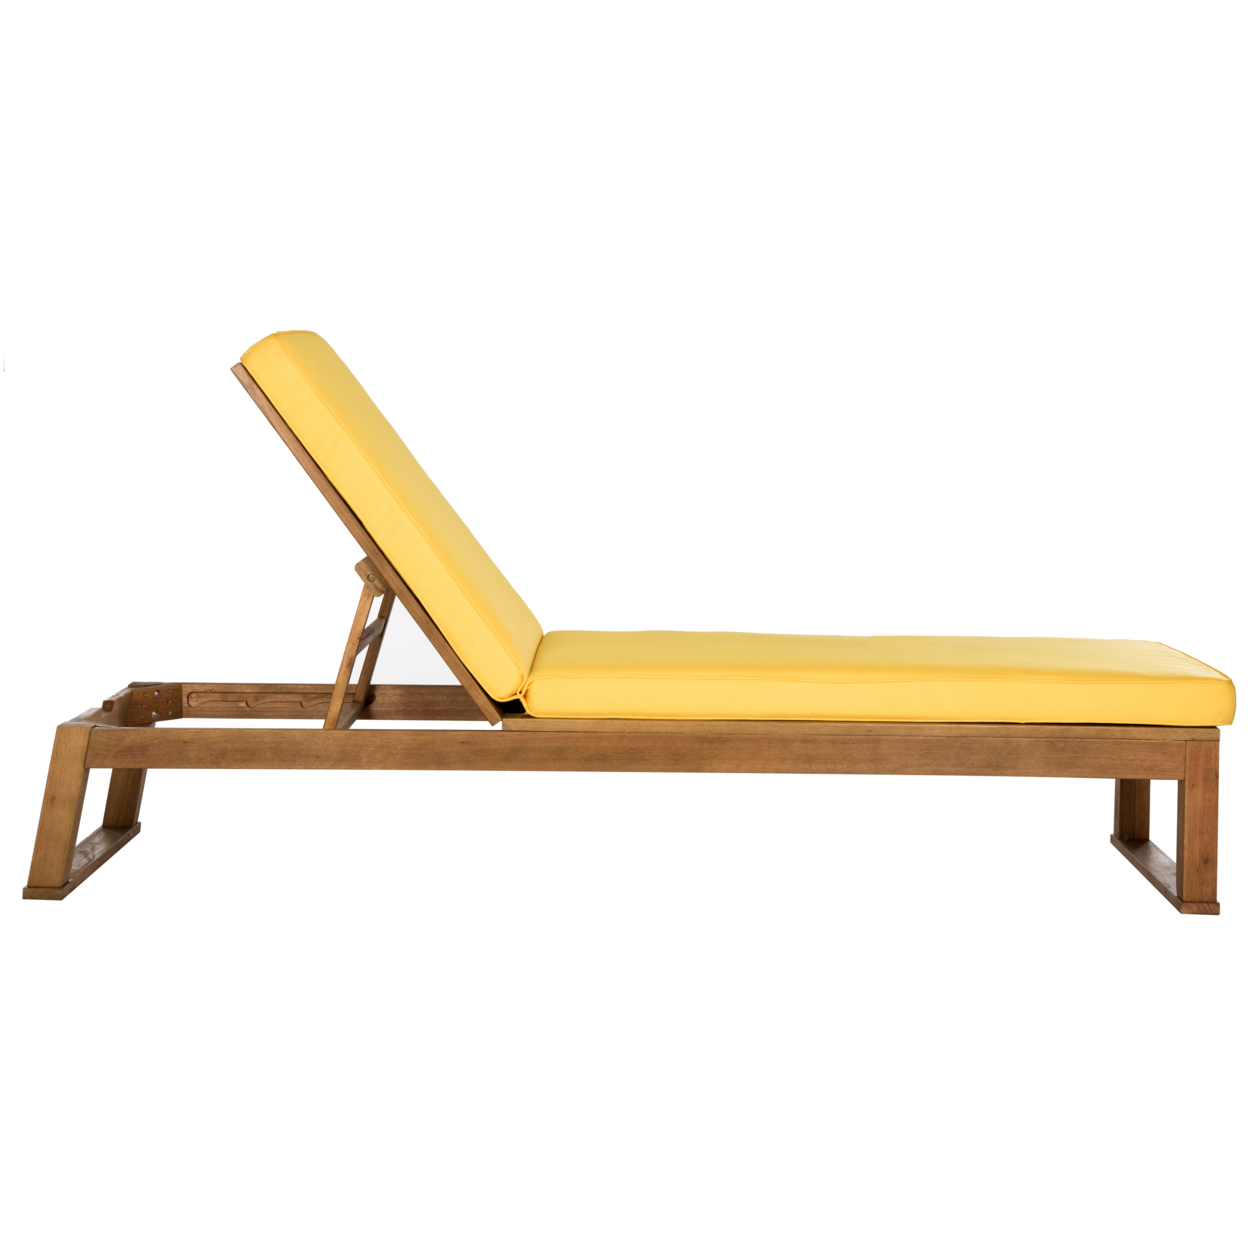 SAFAVIEH Outdoor Collection Solano Chaise Sunlounger Natural/Yellow